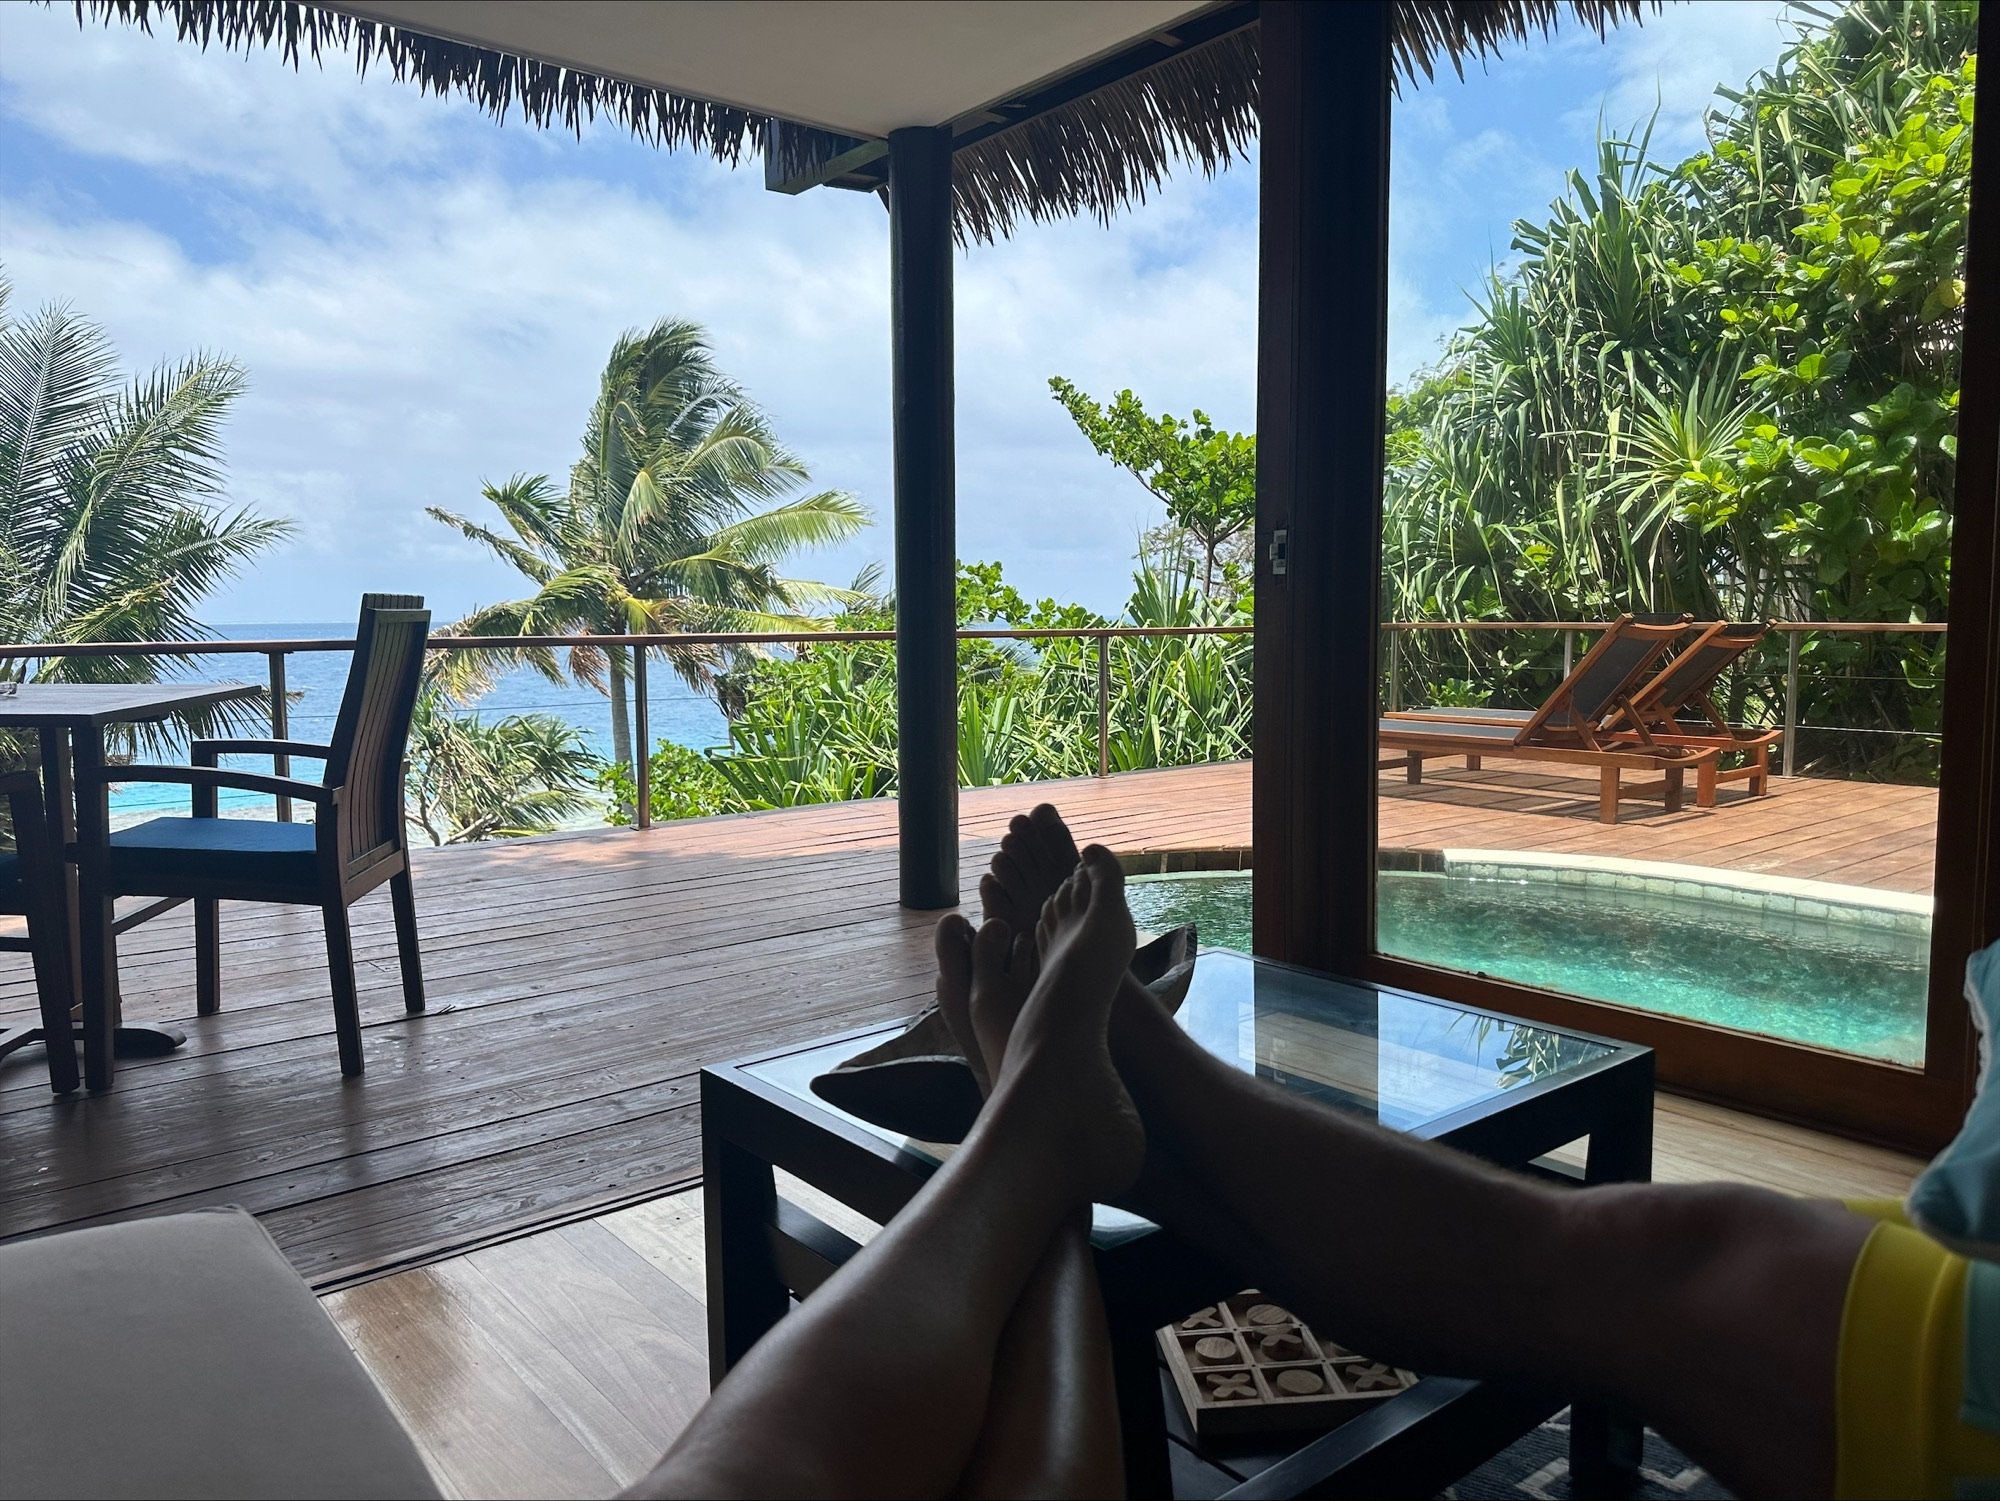 Our luxury, but adventure-filled honeymoon in Fiji was amazing!